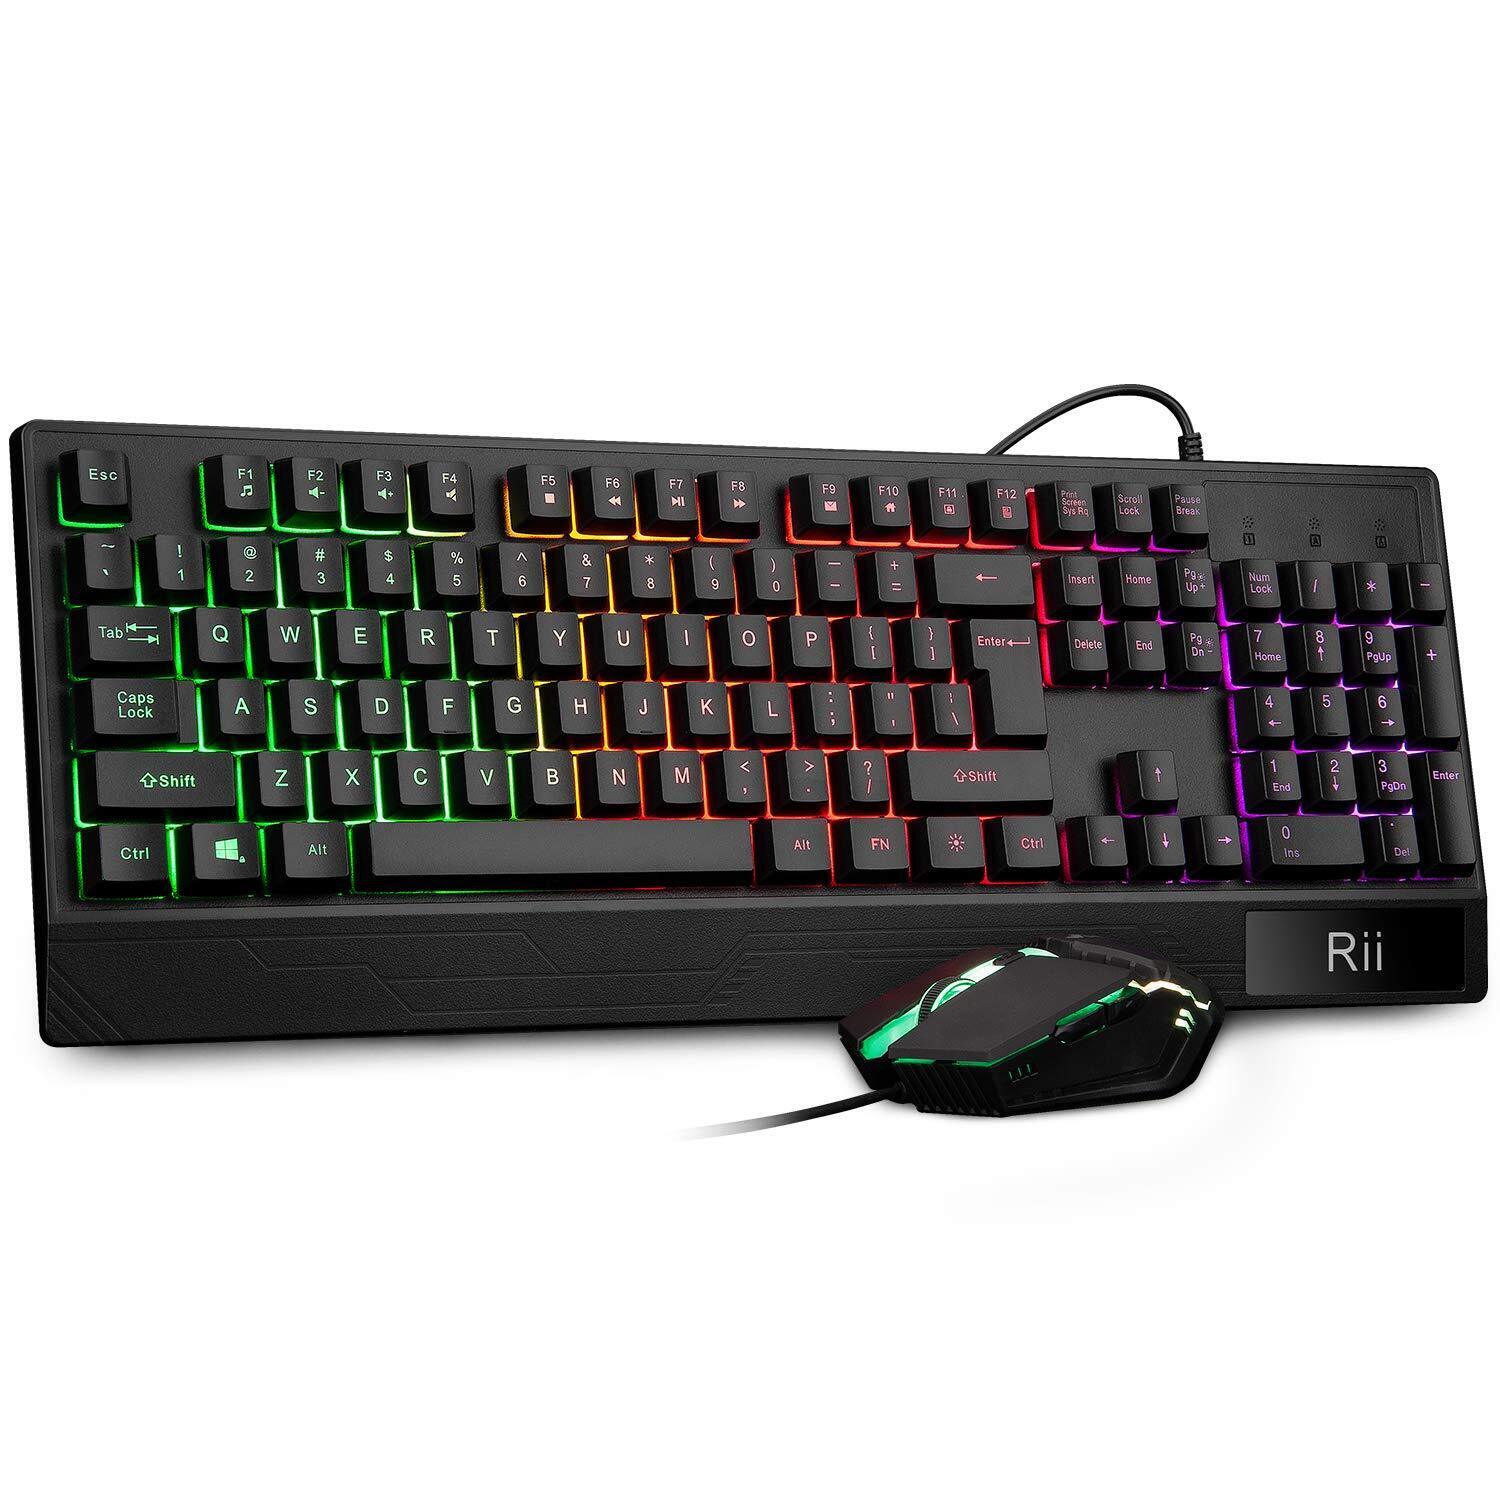 Rii RK400 RGB Gaming Keyboard and Mouse Combo ,Wired Mechanical Feel 3-LED Backl